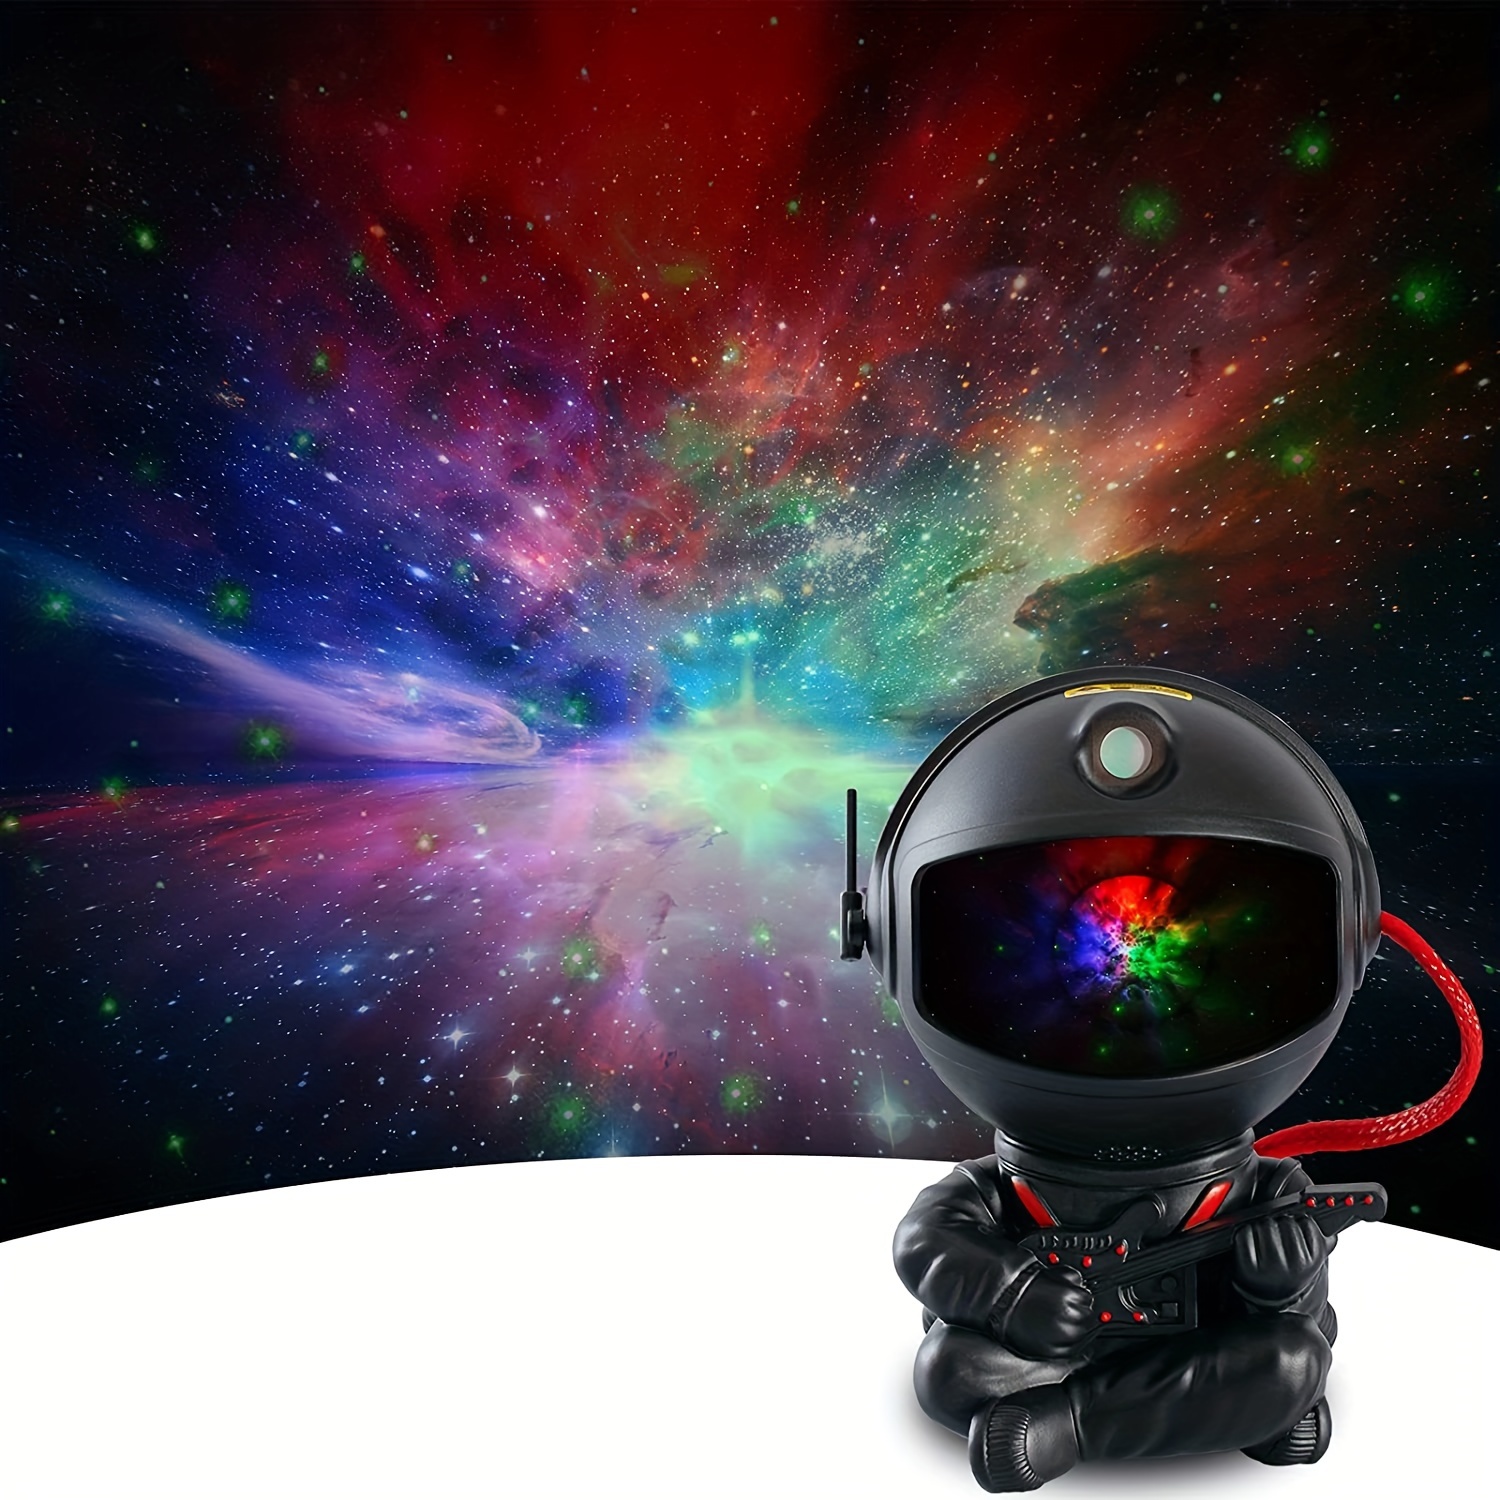 

1pc Astronaut Star Projector Galaxy Night Light, Sky Decor Lamp For Bedroom Christmas, Small & Bright Cute Astronaut Led Lights, Space Nebula Starry Cloud With Remote Control